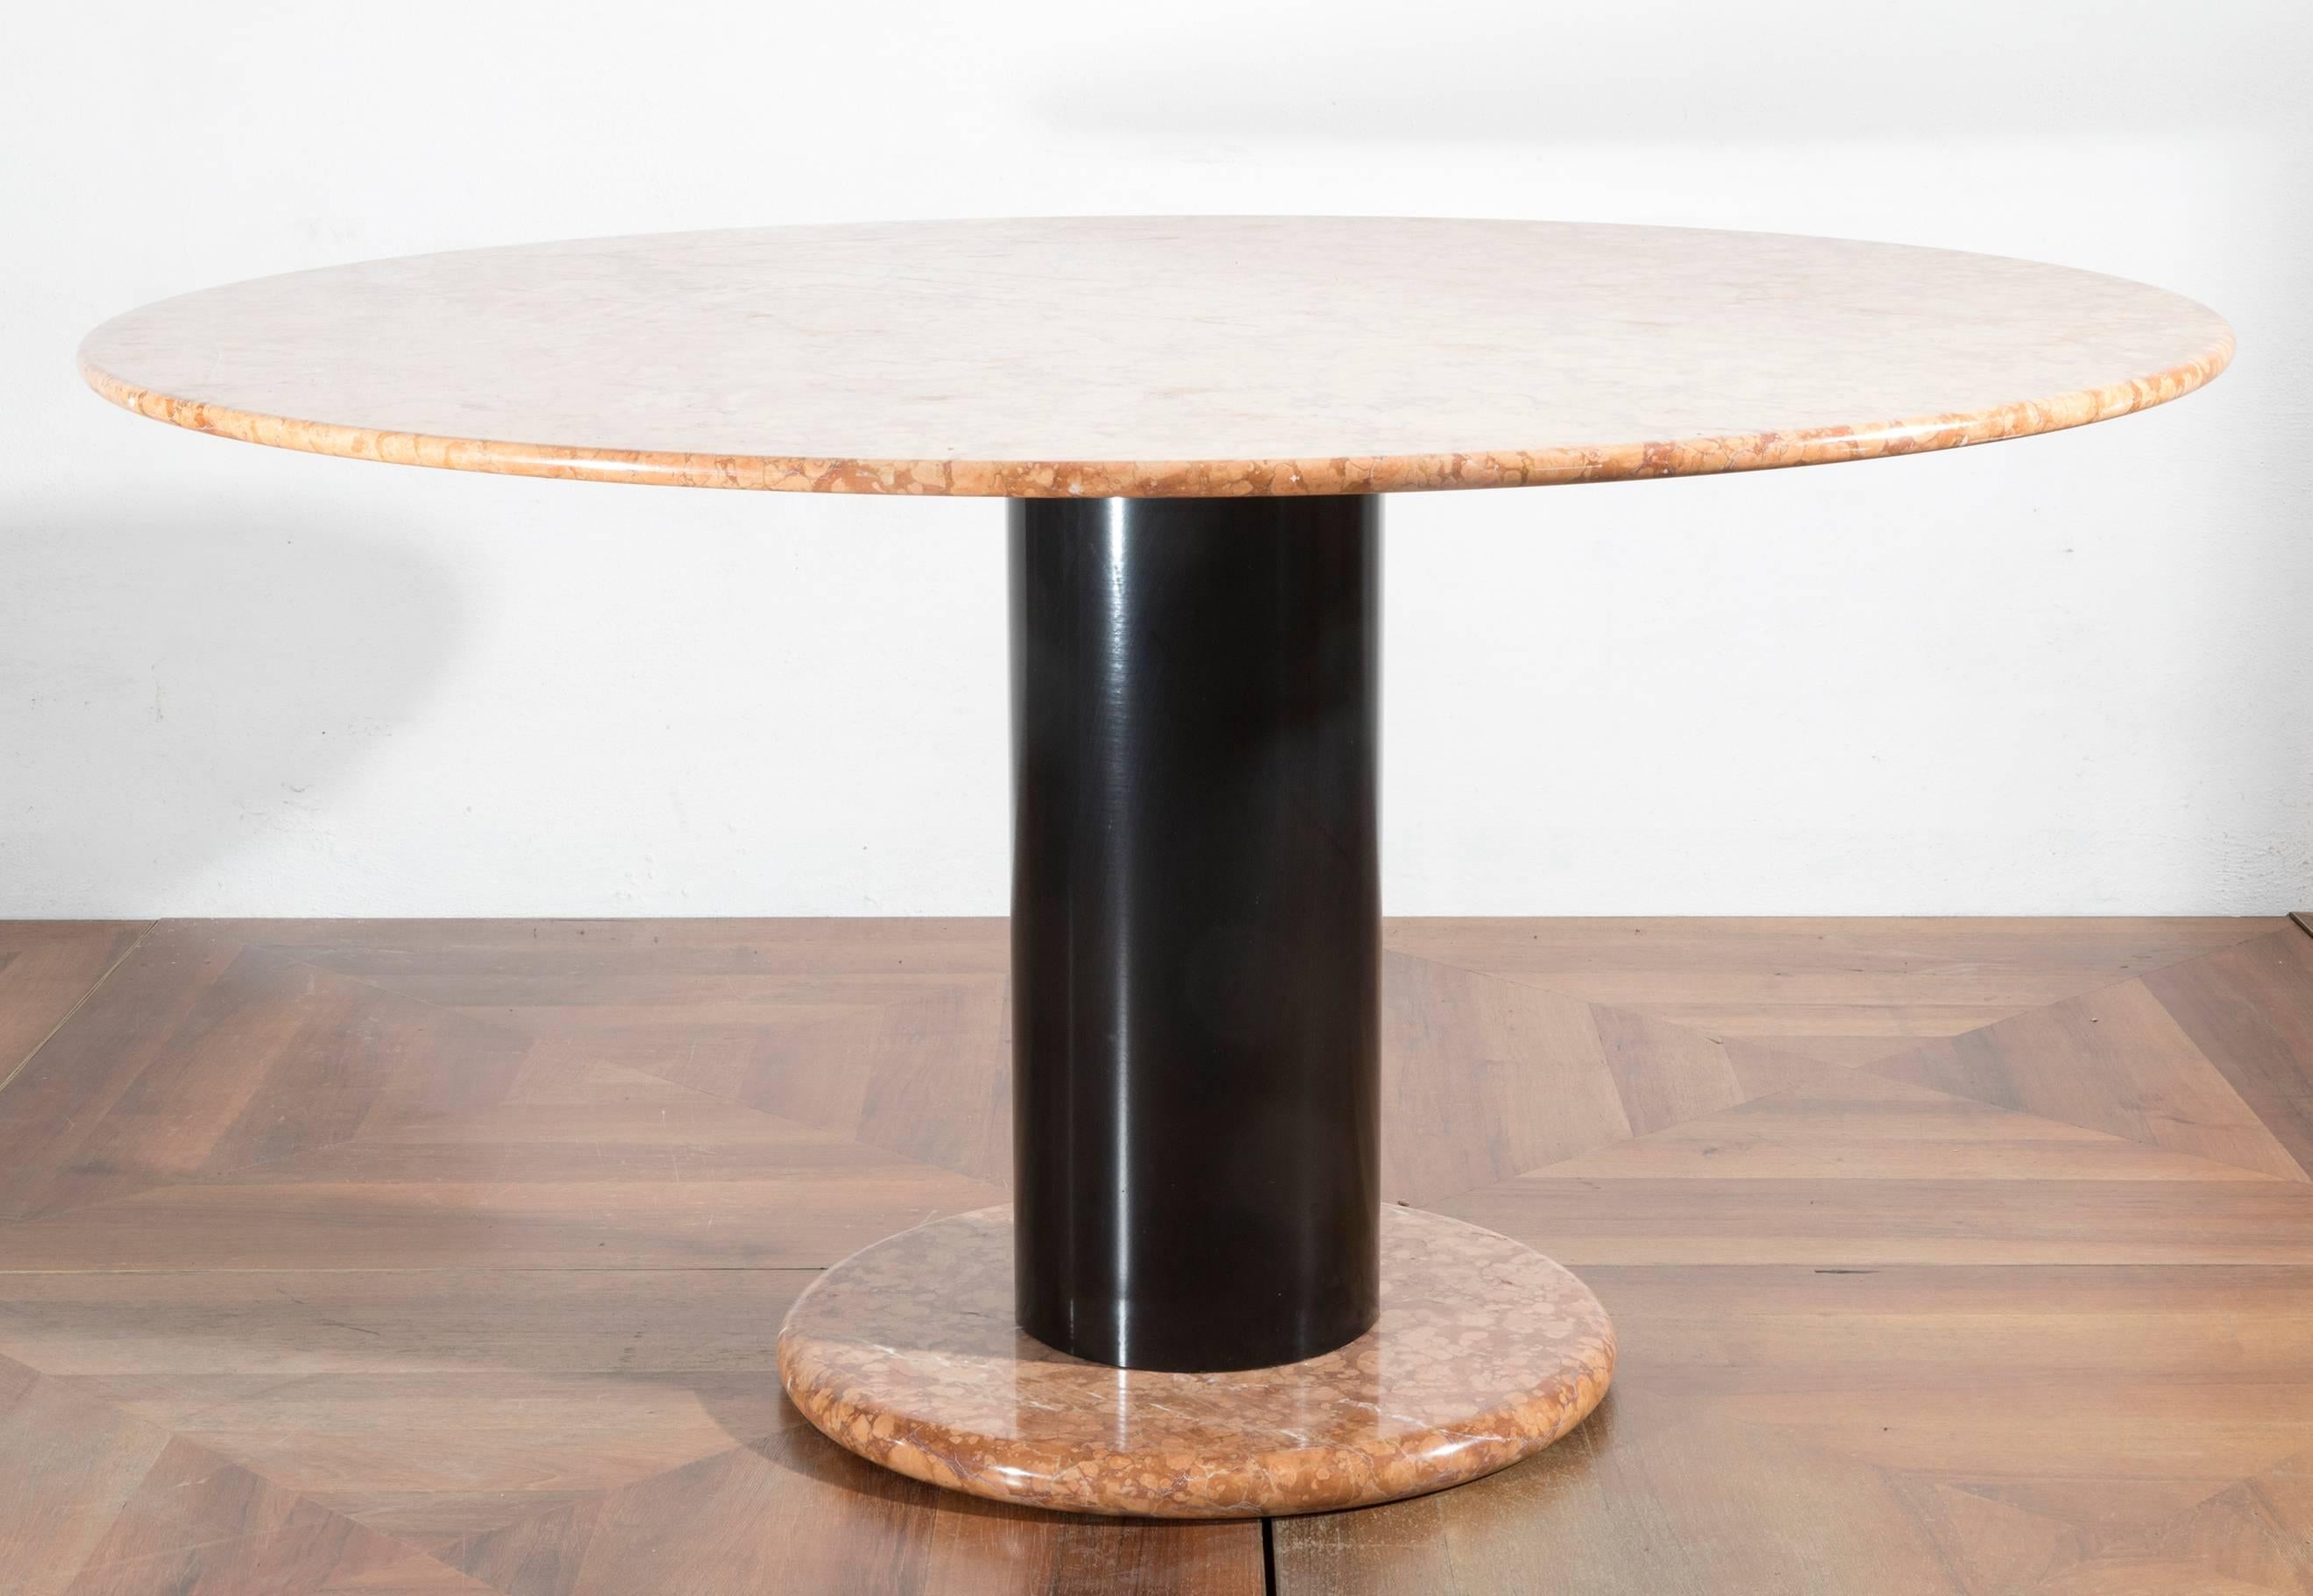 Red 'Verona' marble and black varnished metal round table designed by Ettore Sottsass for Poltronova in 1965. It's part of the Poltronova Loto Table series produced since 1964.

 